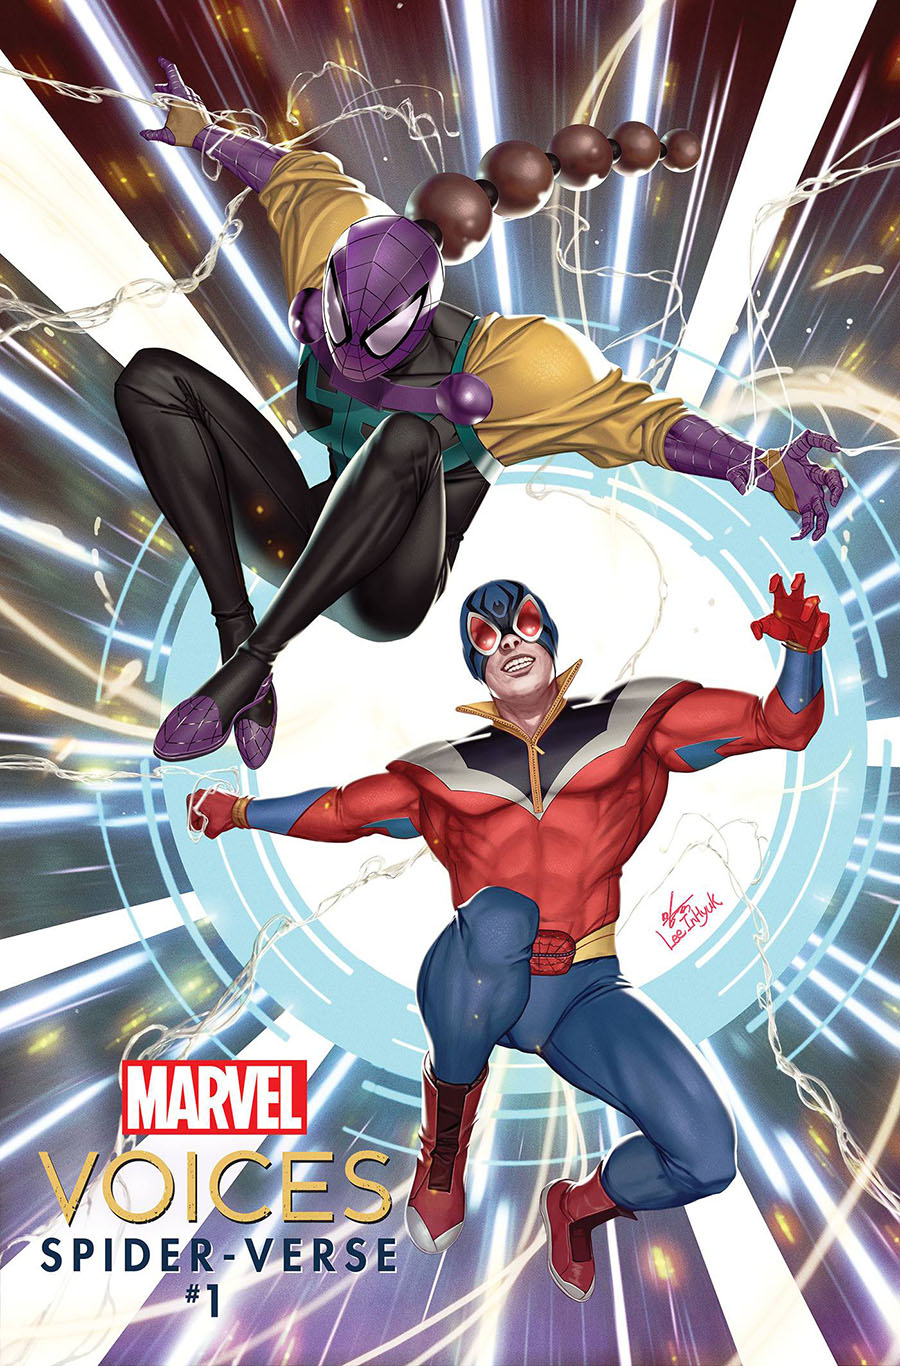 Marvels Voices Spider-Verse #1 (One Shot) Cover D Variant Inhyuk Lee Cover